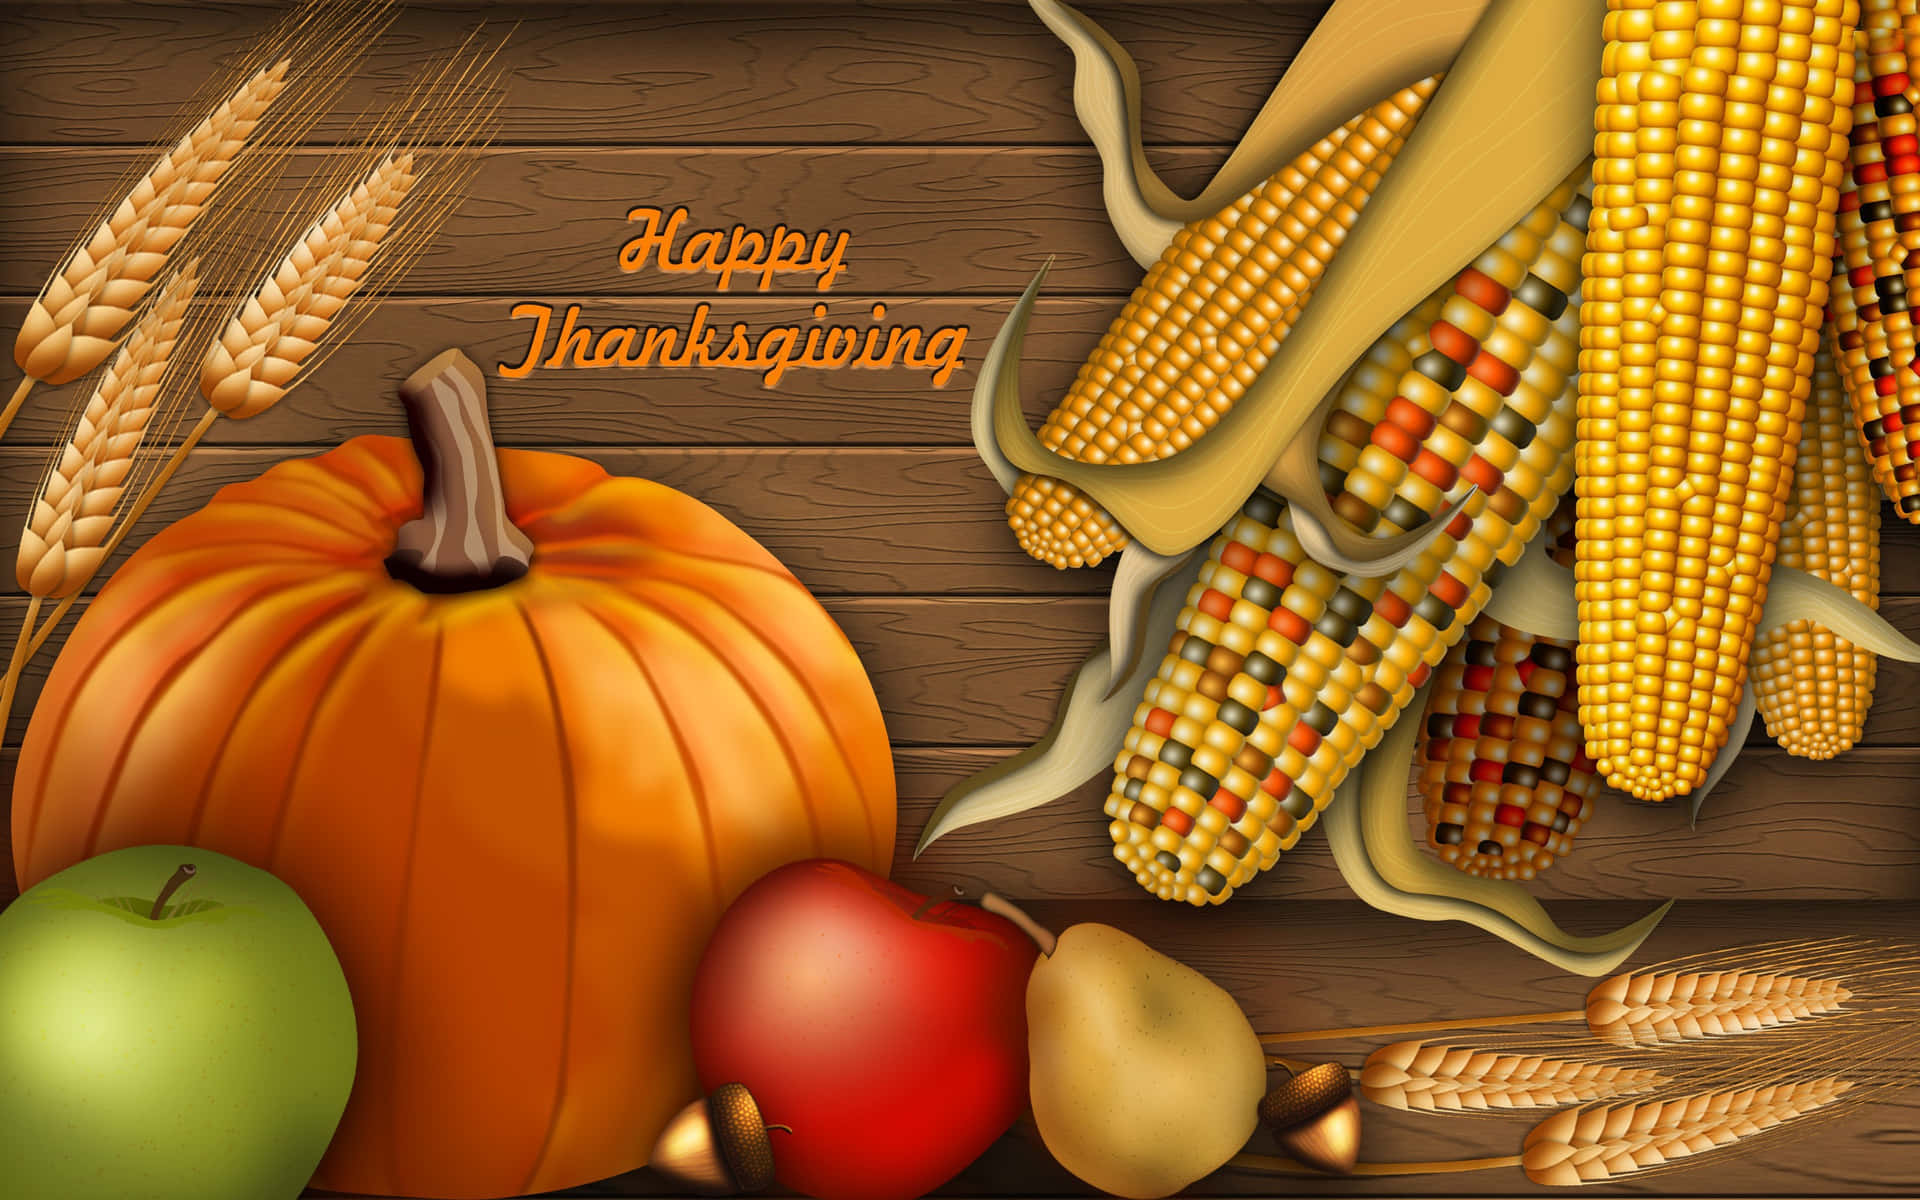 High Resolution Thanksgiving Drawings Fruits And Vegetables Background